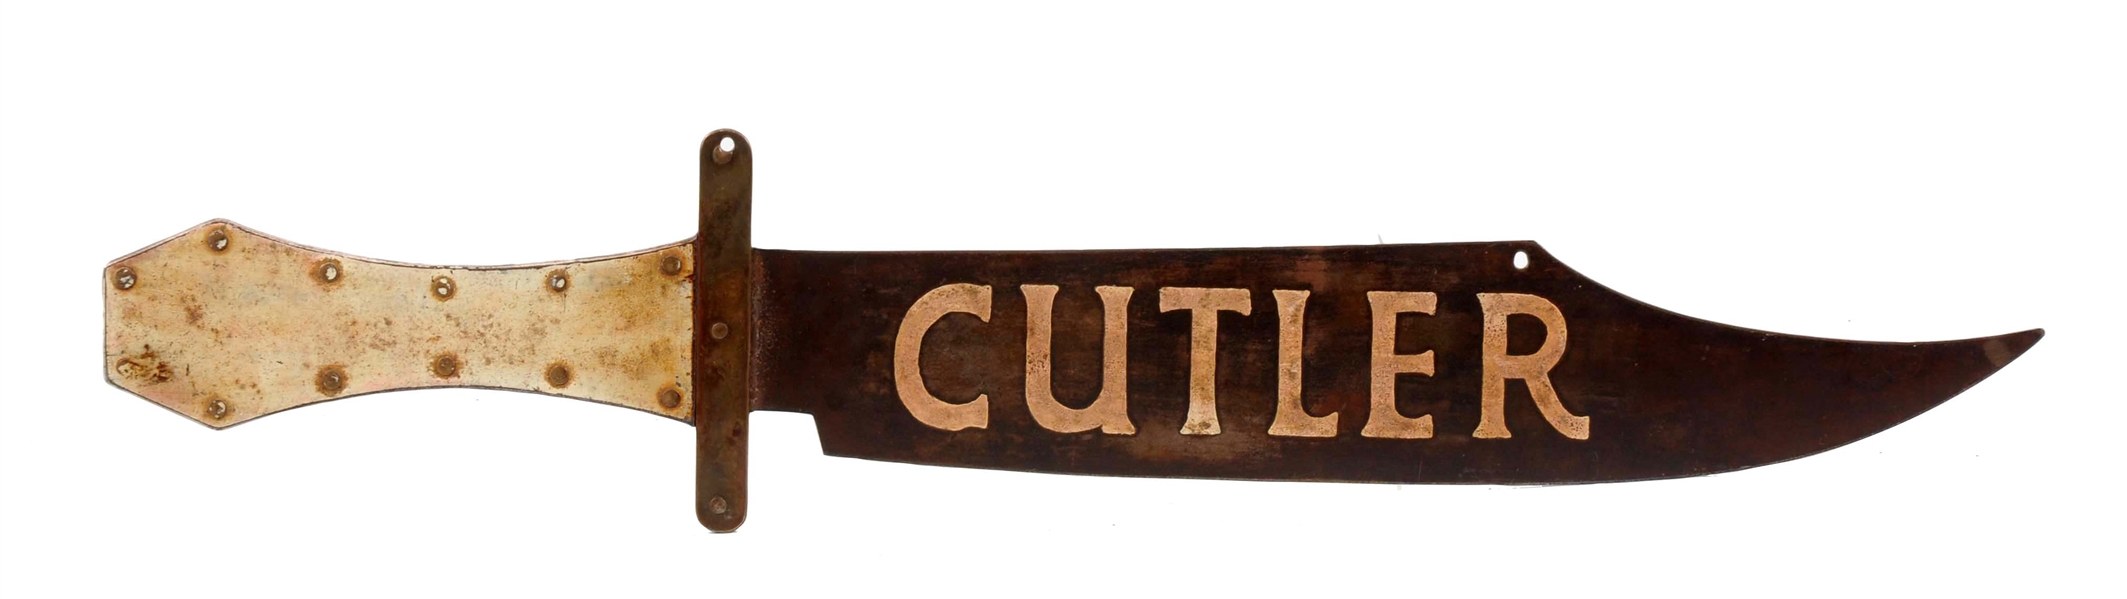 CUTLER FIGURAL BOWIE KNIFE TRADE SIGN.